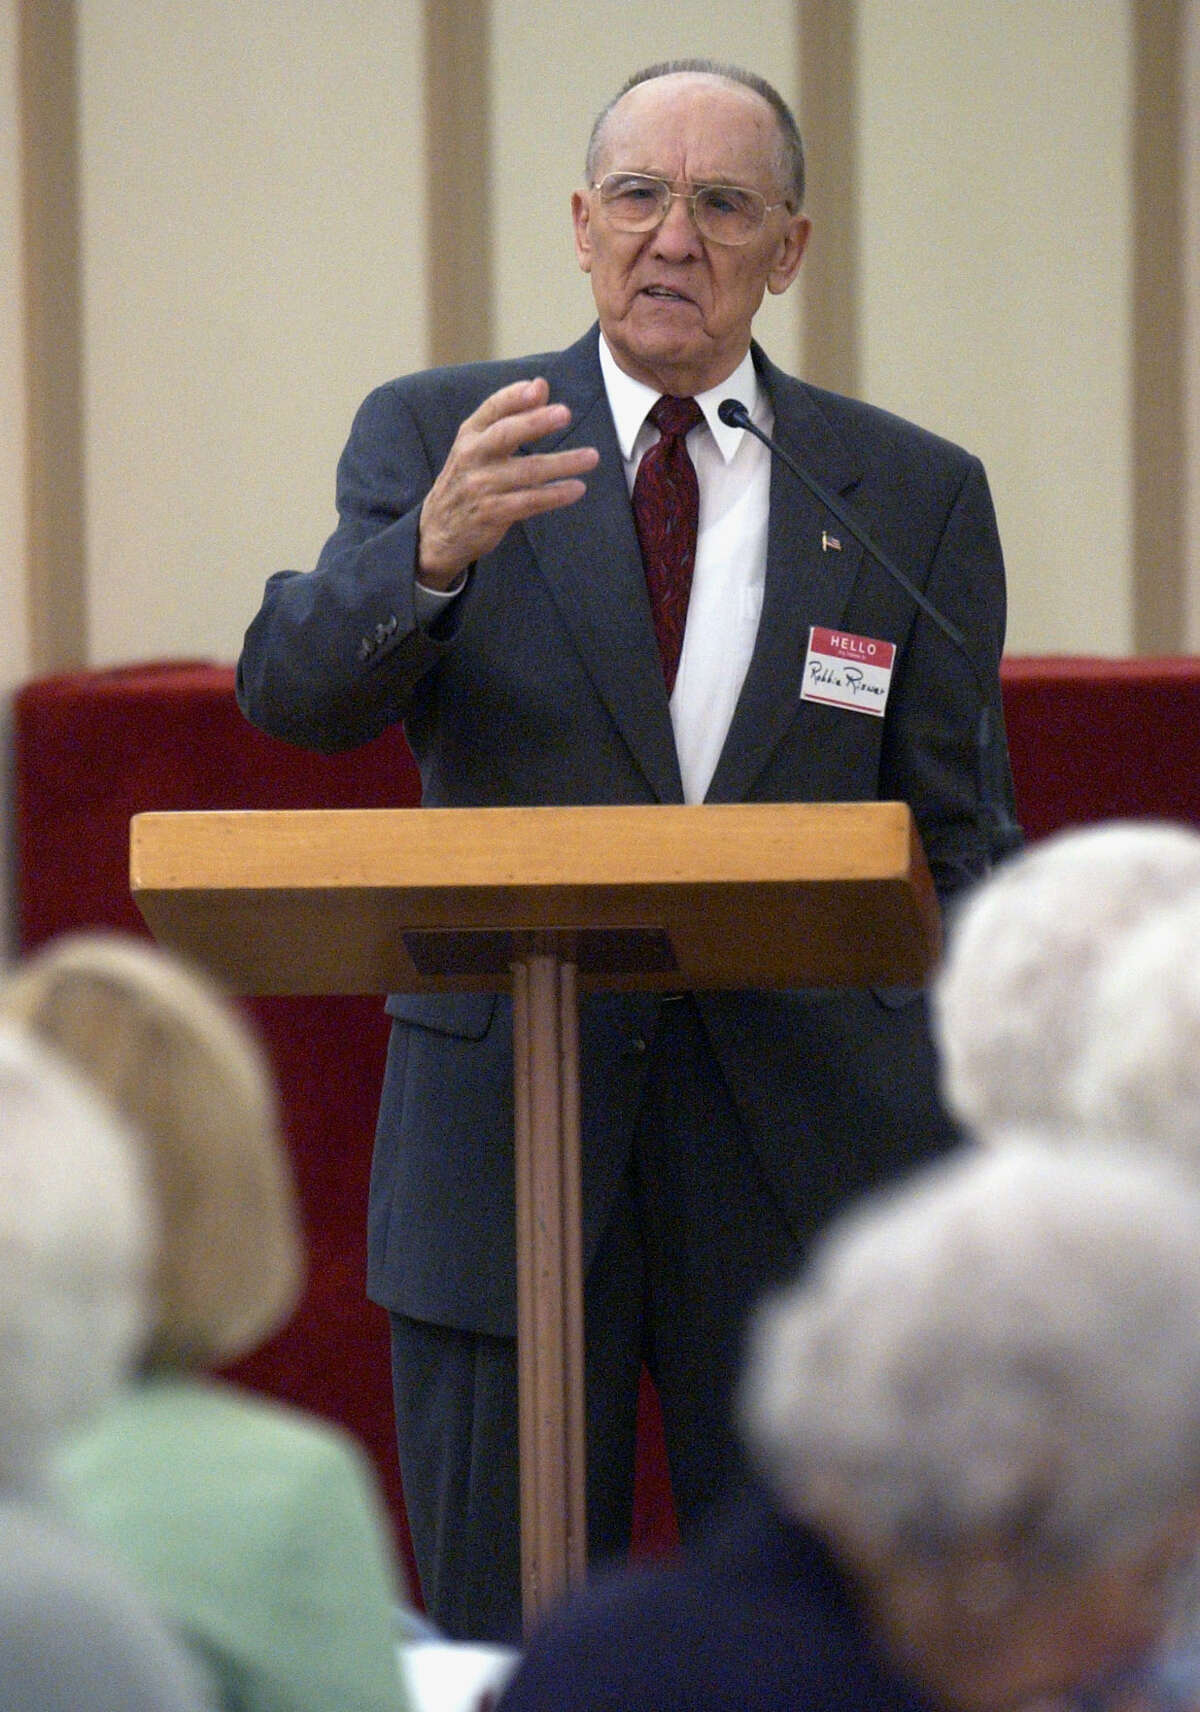 Retired Air Force Brig. Gen. Robbie Risner speaks Thursday afternoon March 13, 2003 at St. Mark's Episcopal Church during a Republican Business Women of Bexar County luncheon. Risner was held as a prisoner of war at the so-called "Hanoi Hilton" for seven years during the vietnam war. (WILLIAM LUTHER/STAFF)